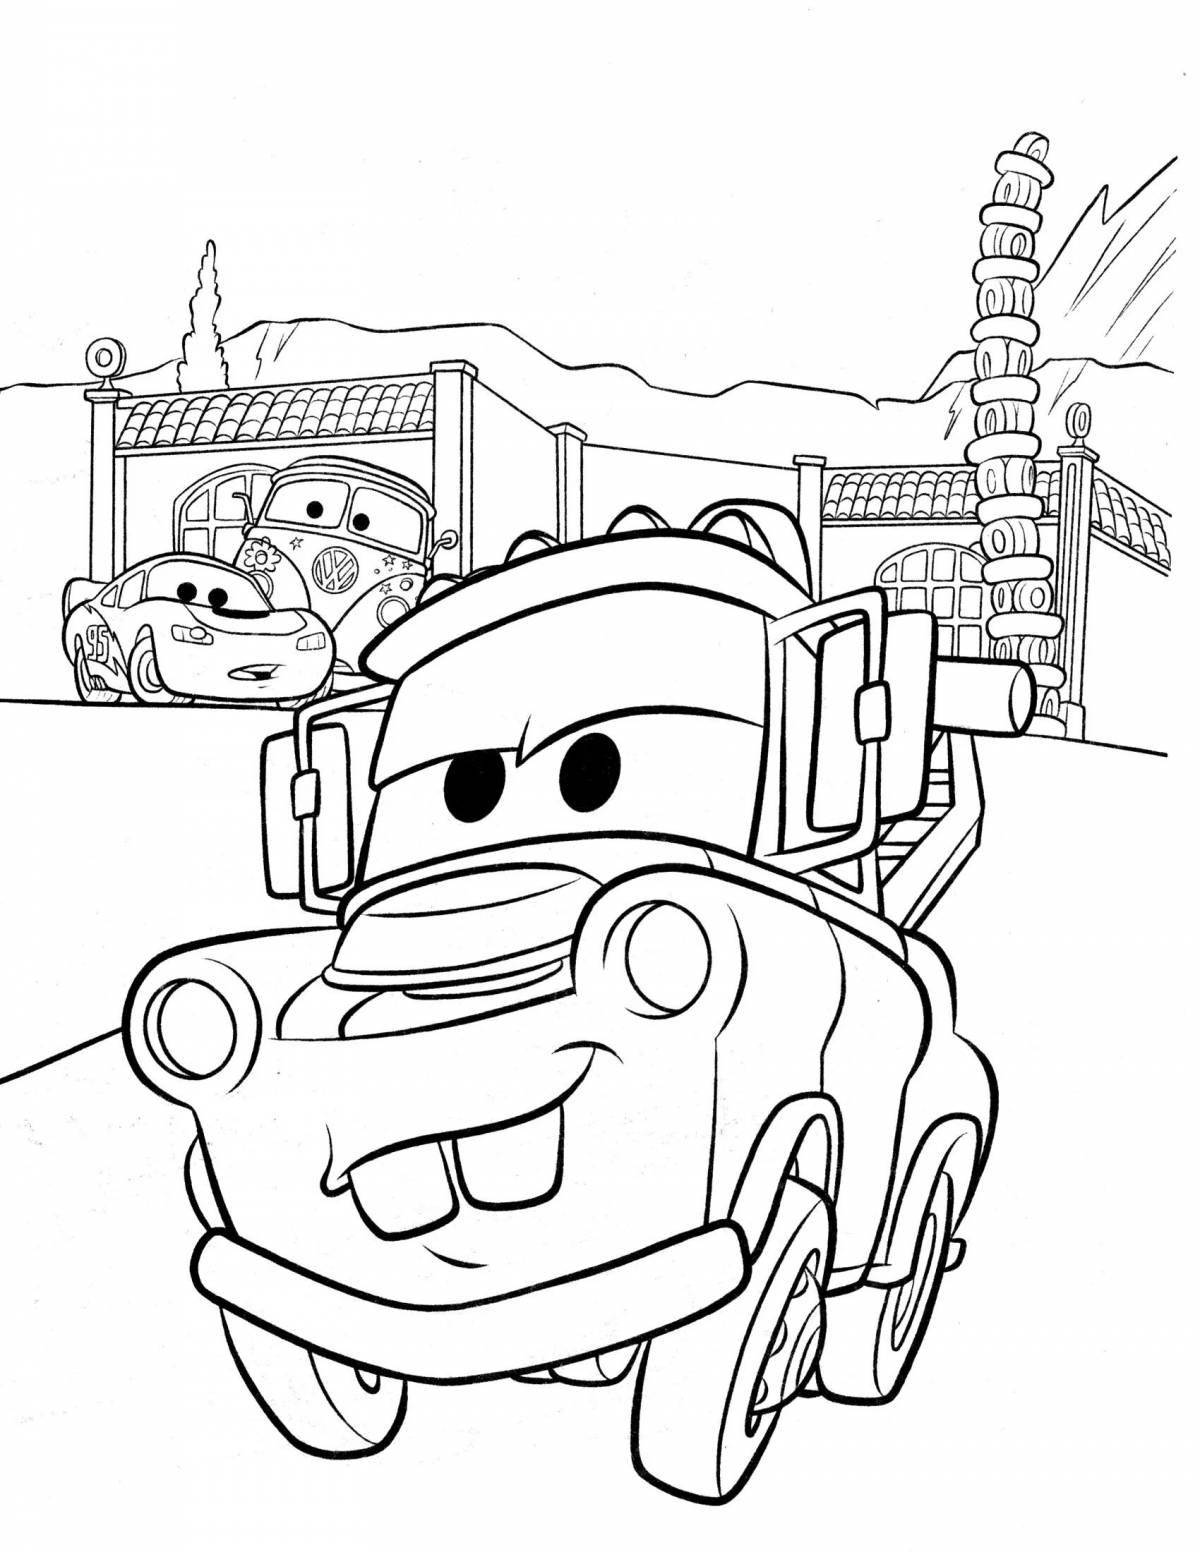 Lovely auto patrol coloring page